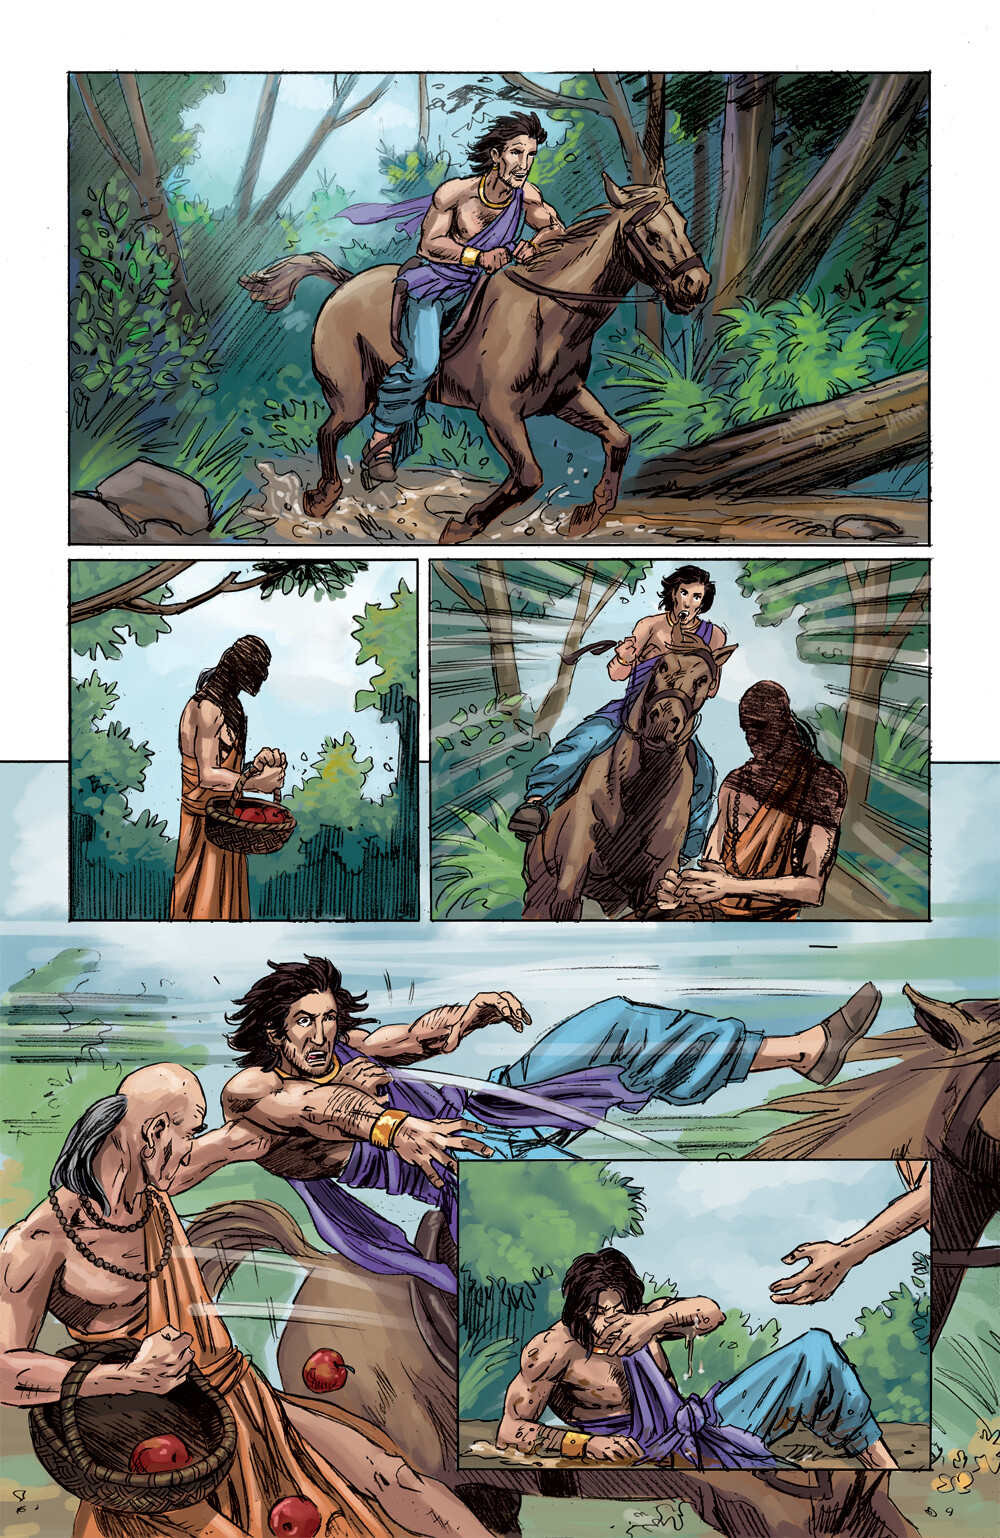 Scions of the Cursed King #2
Page 9, color by Vivek Goel